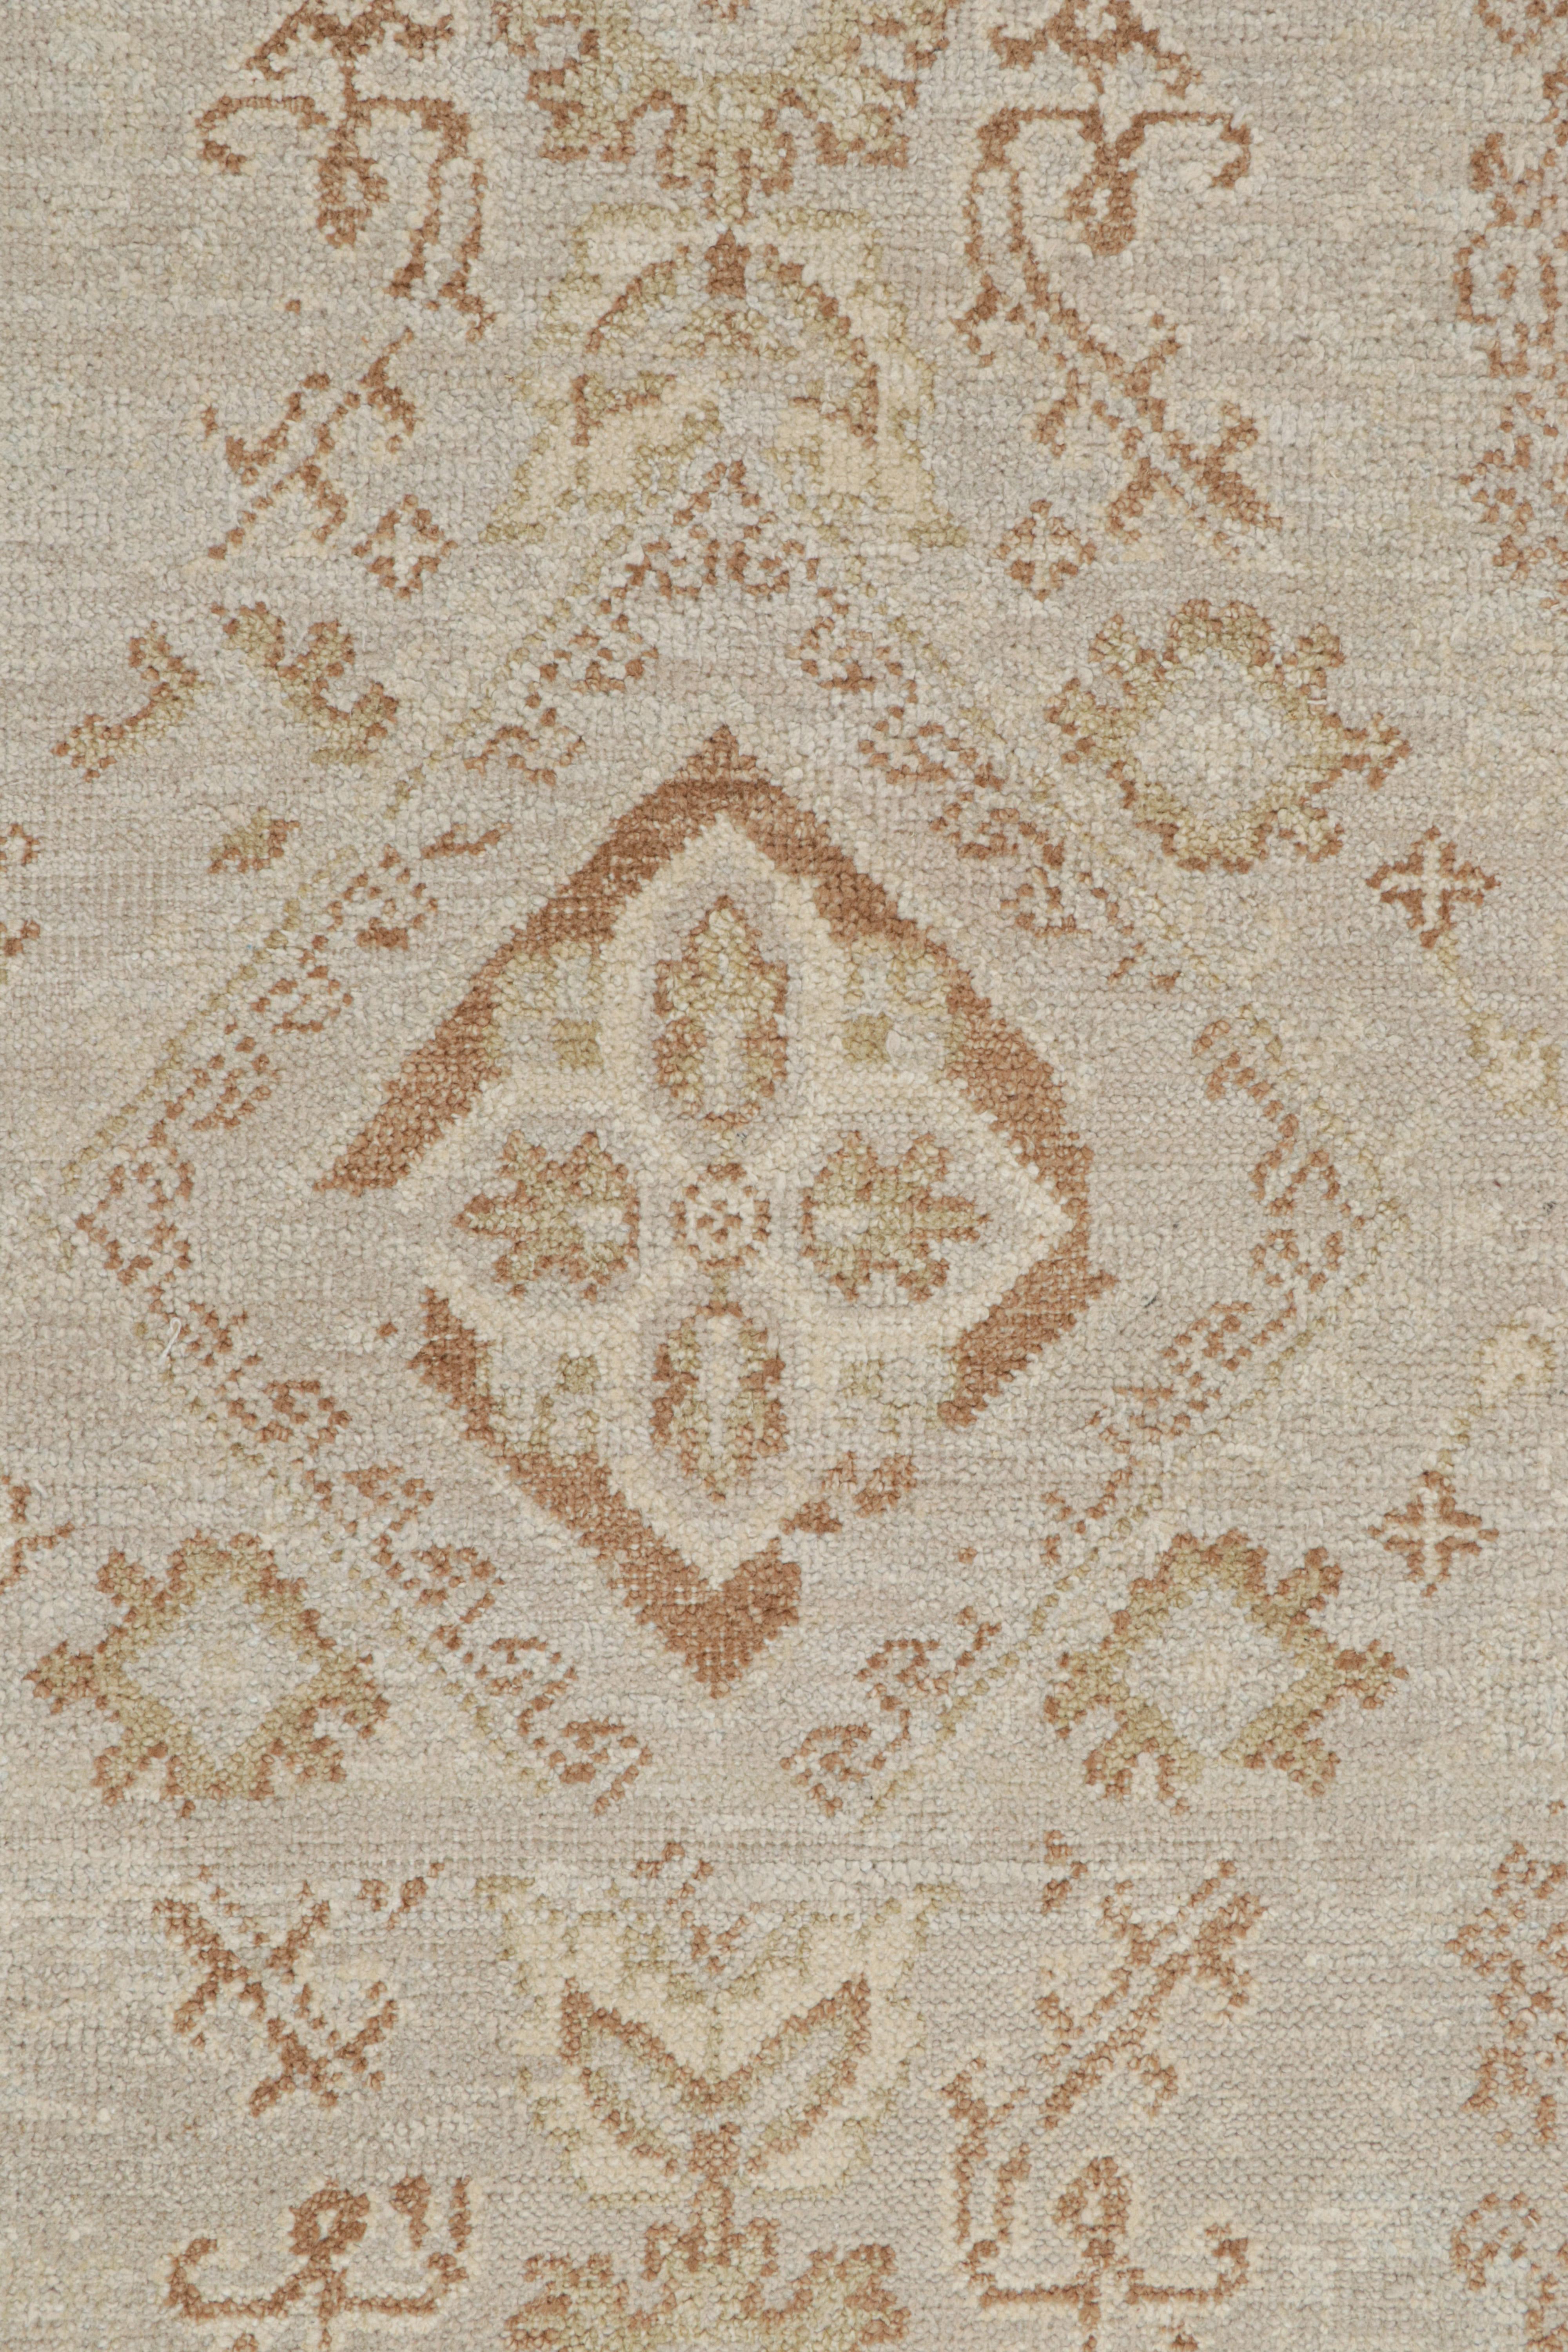 Contemporary Rug & Kilim’s Oushak style rug in Greige & Brown Floral Patterns For Sale